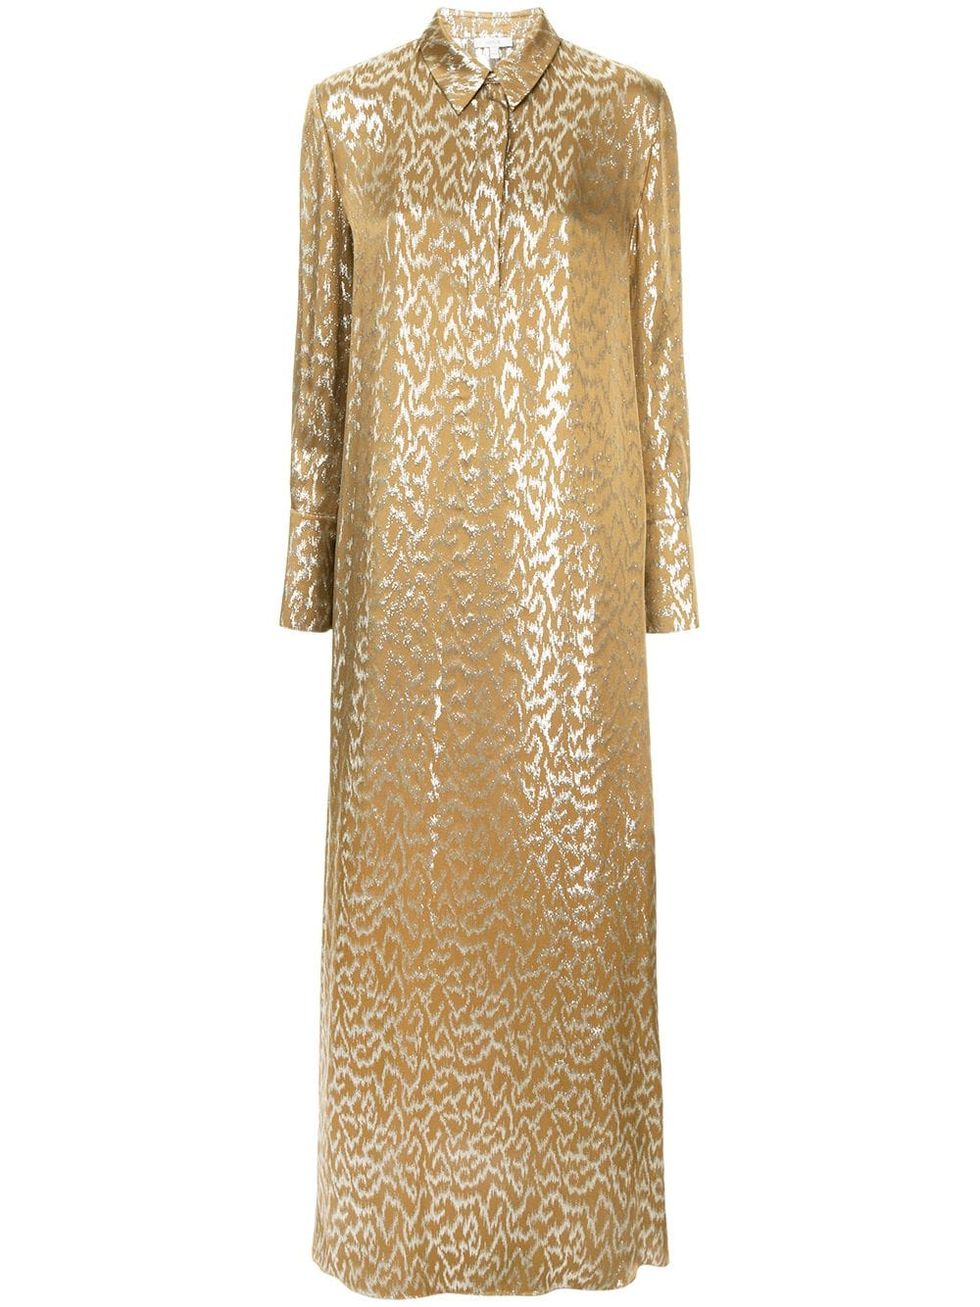 Clothing, Dress, Day dress, Beige, Yellow, Sleeve, Formal wear, Gown, Neck, Cocktail dress, 